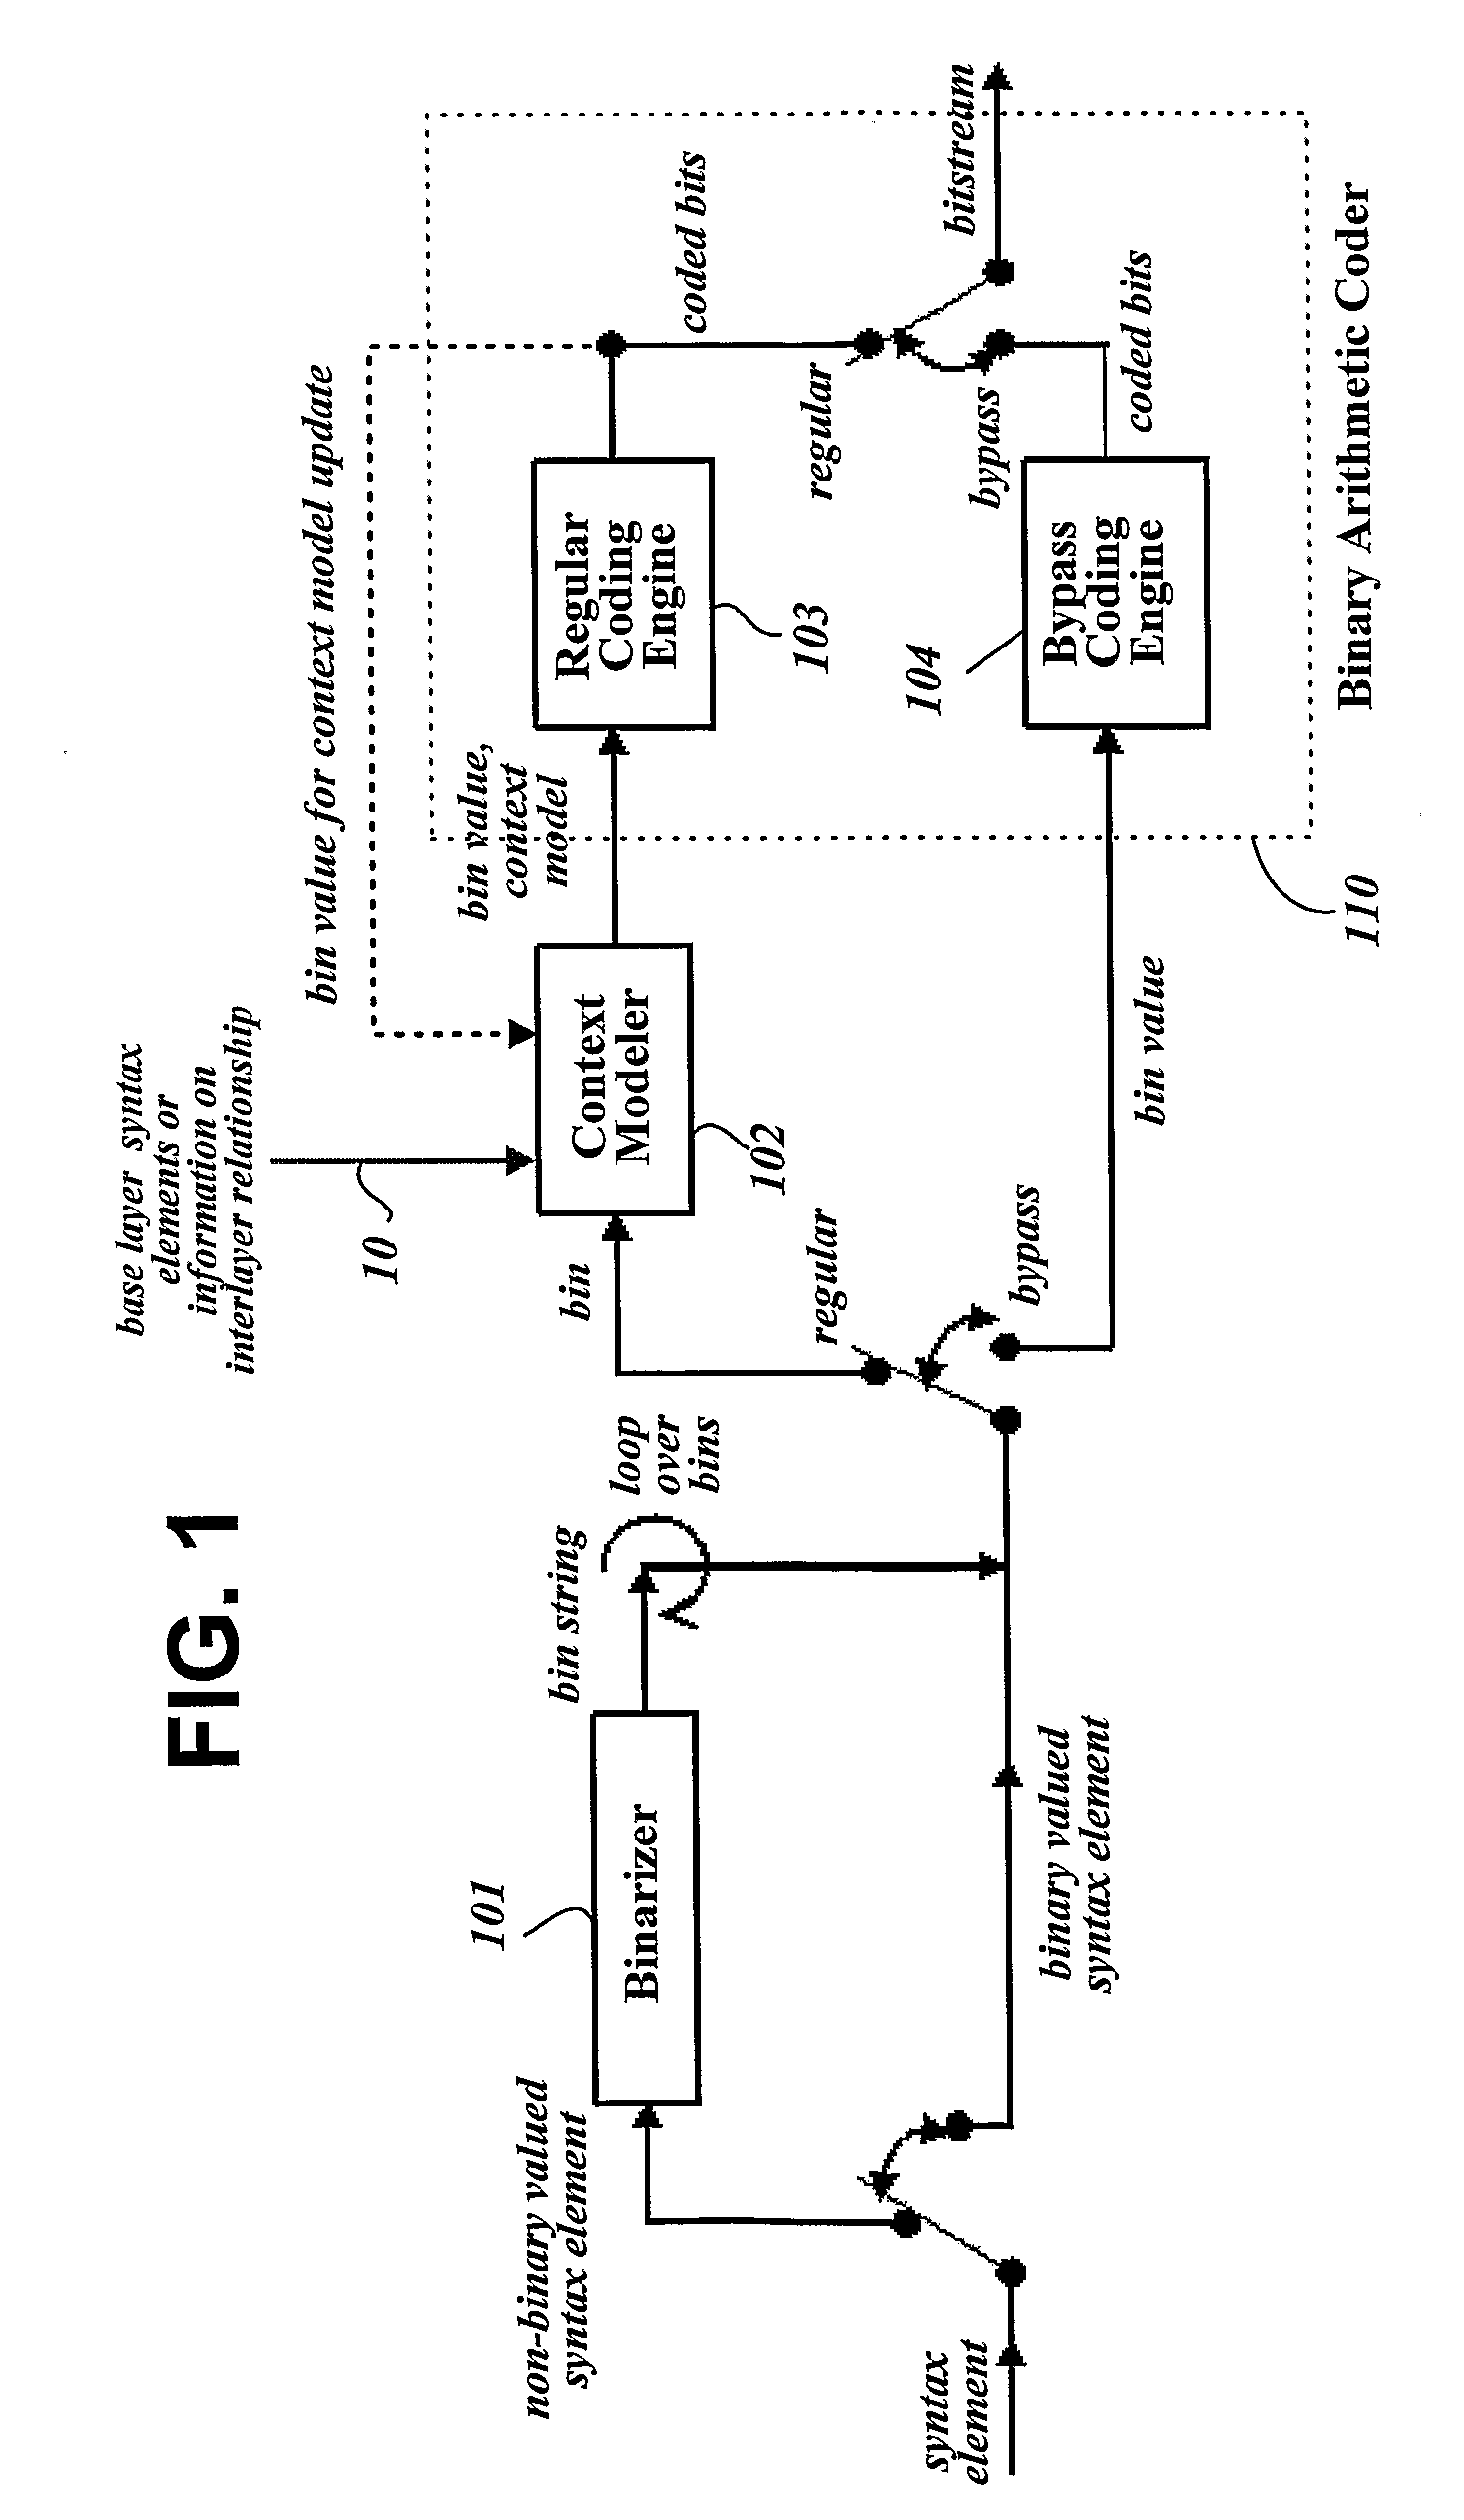 Method for Modeling Coding Information of a Video Signal for Compressing/Decompressing Coding Information